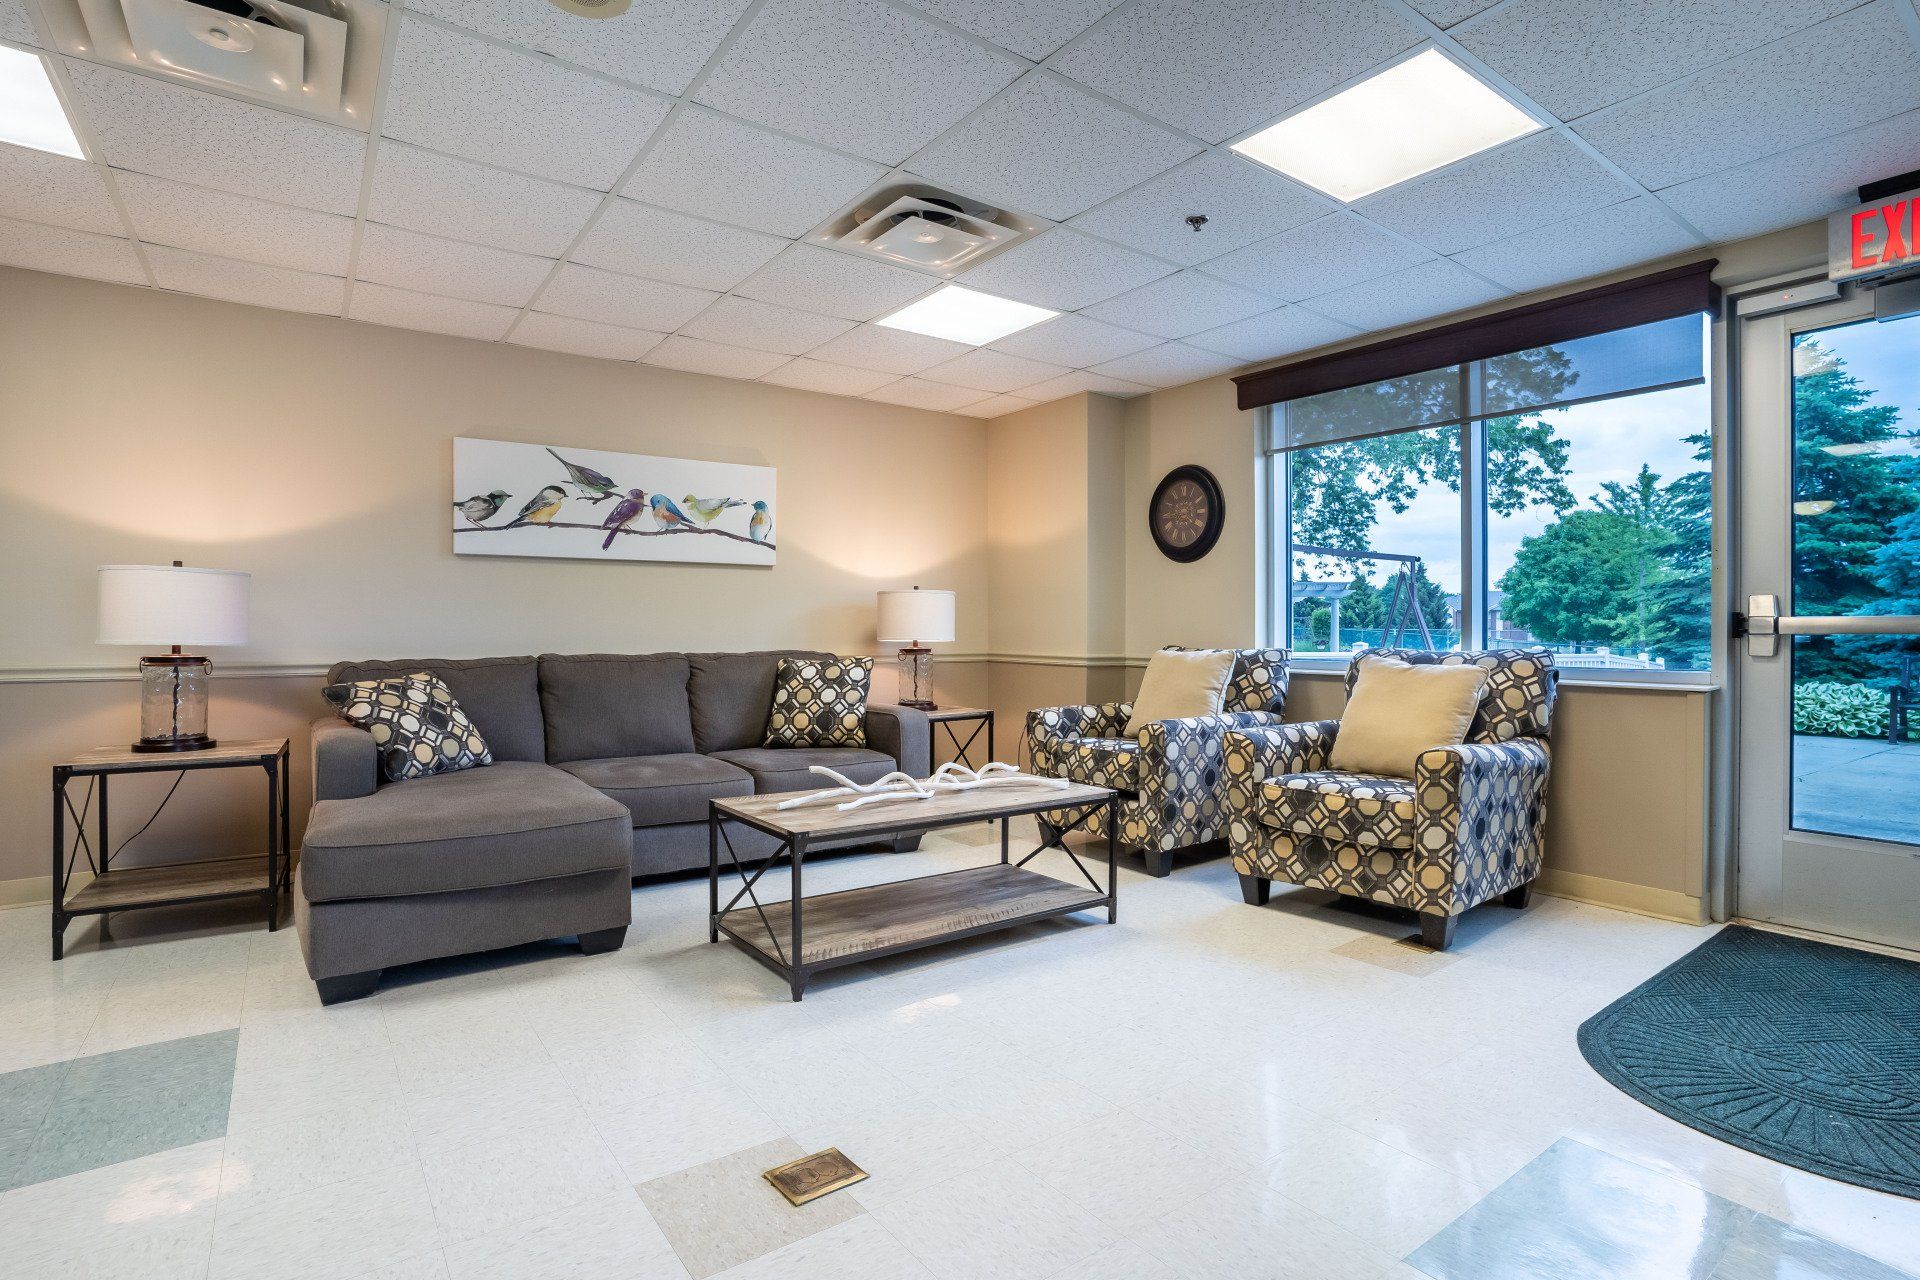 Living Room at Lenawee Medical Care Facility in Adrian, MI